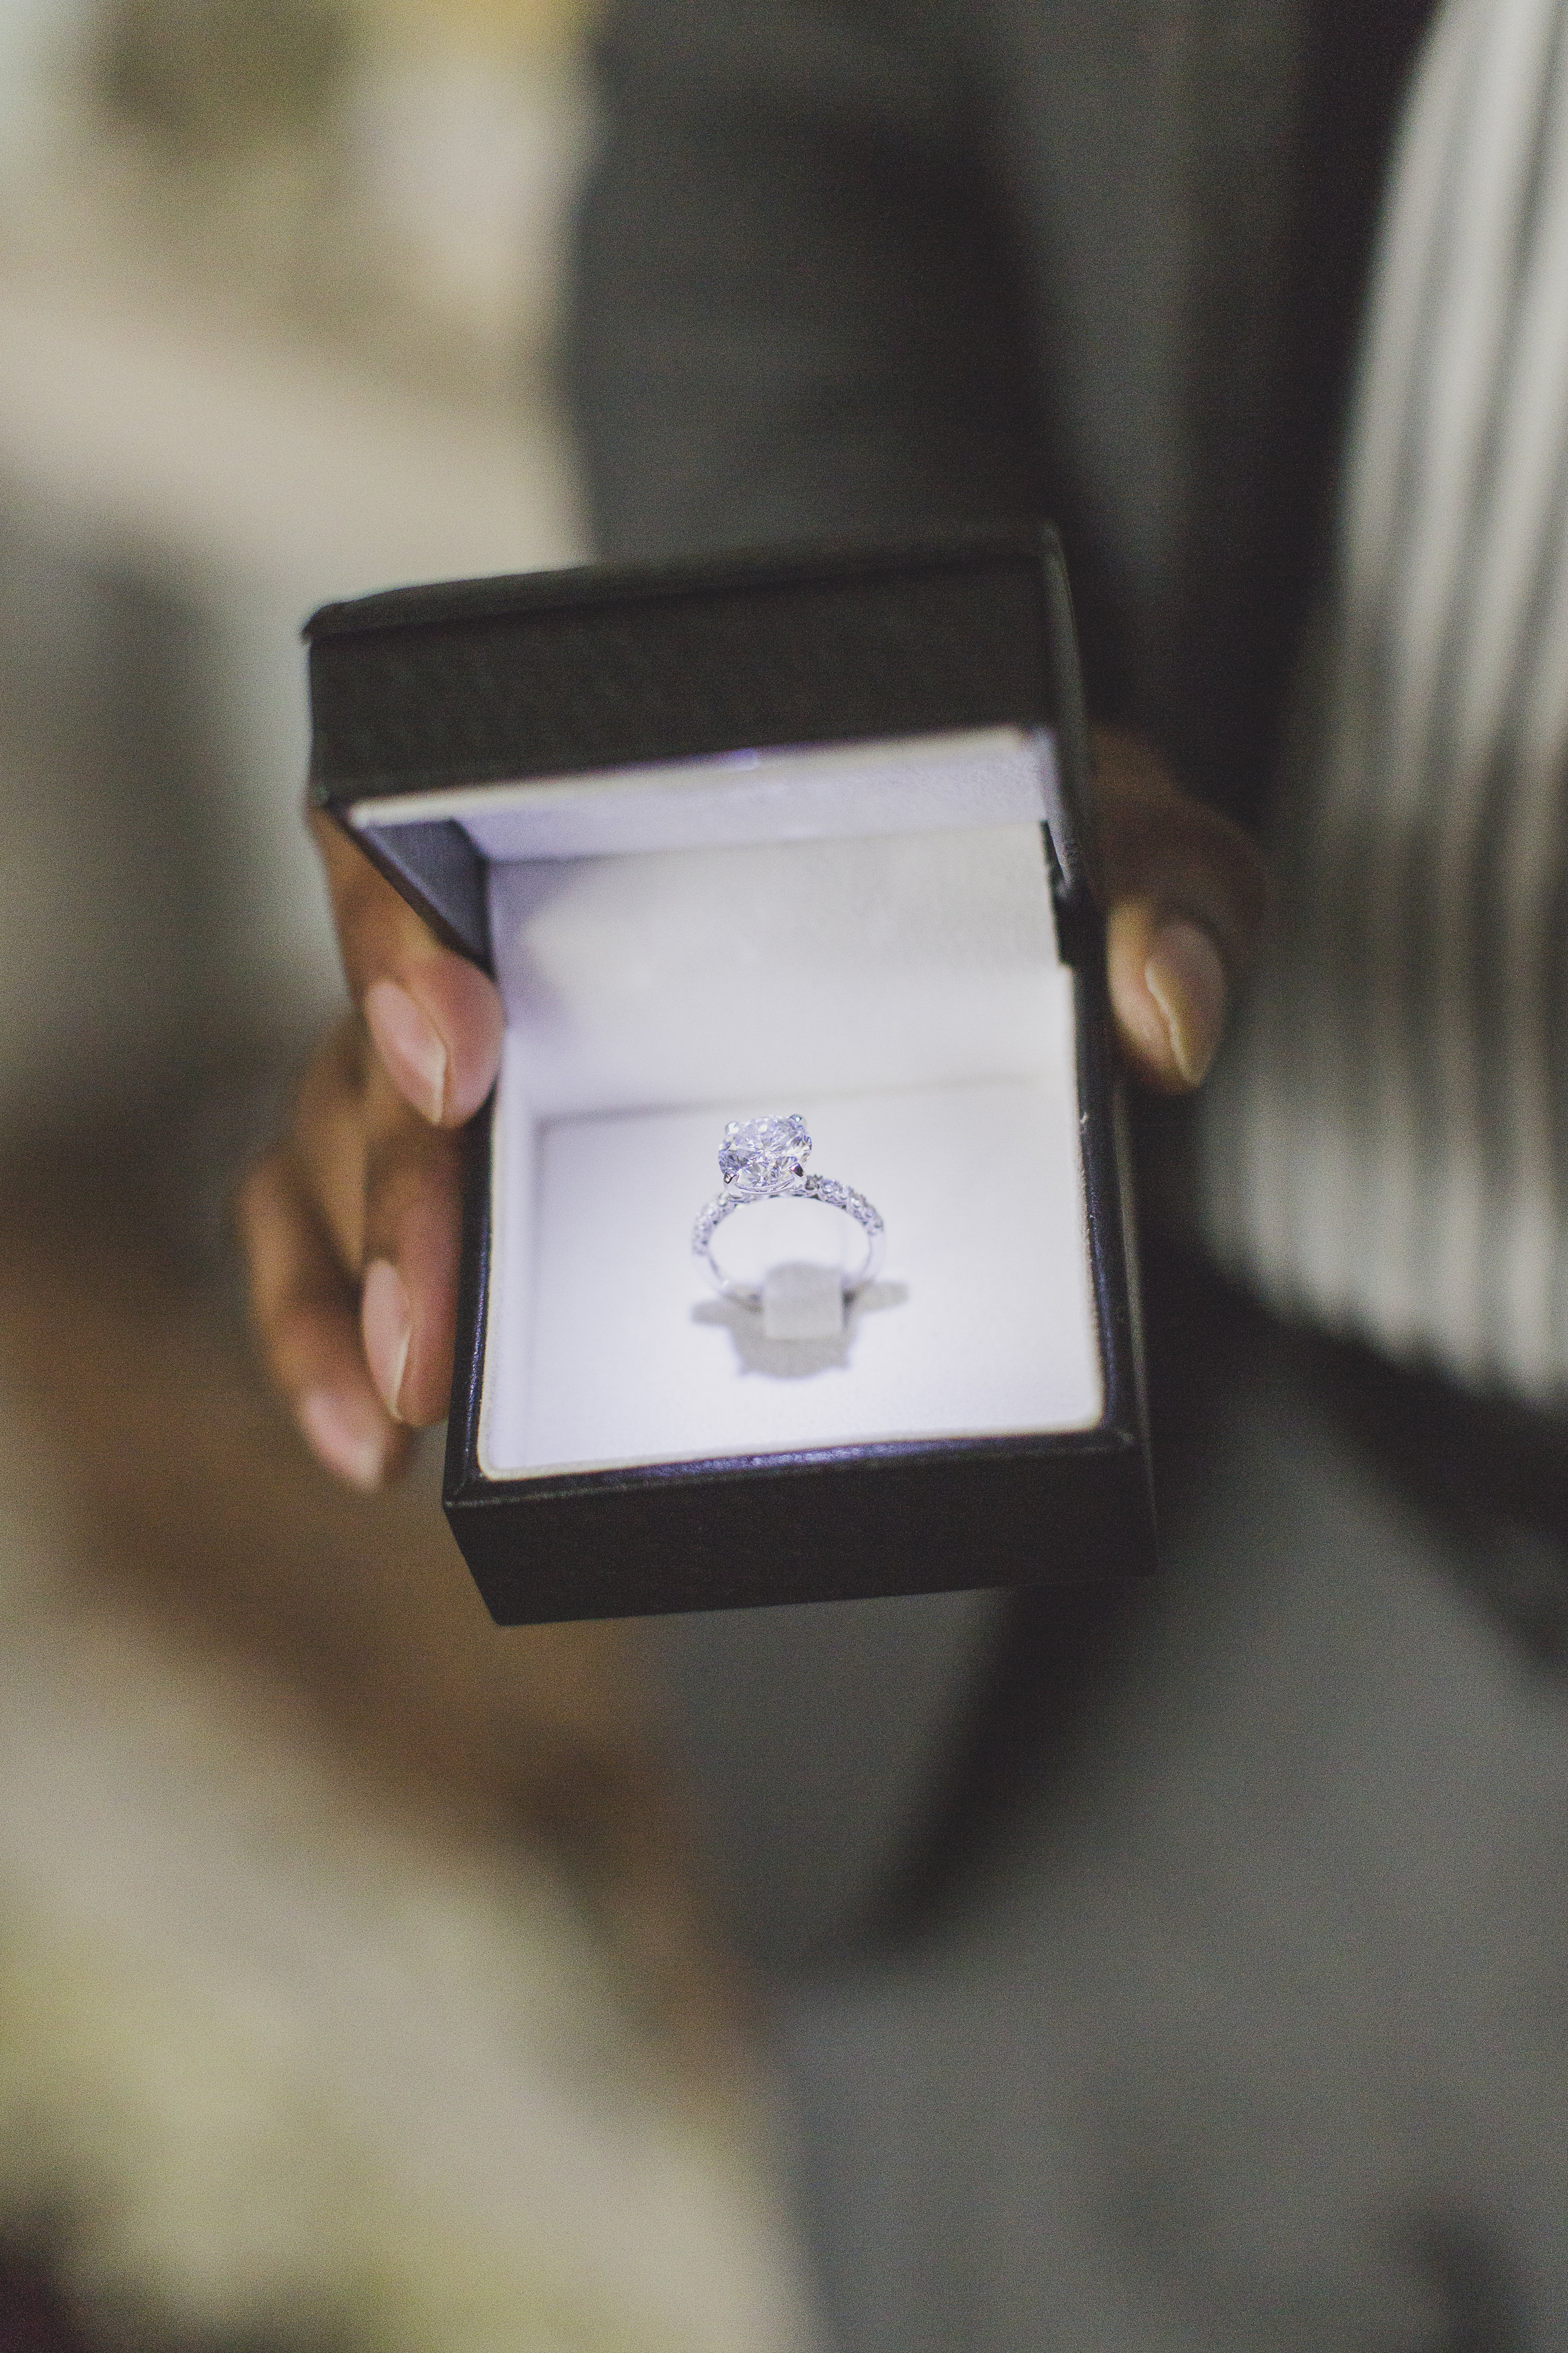 View More: http://michelleablephotography.pass.us/aniproposal